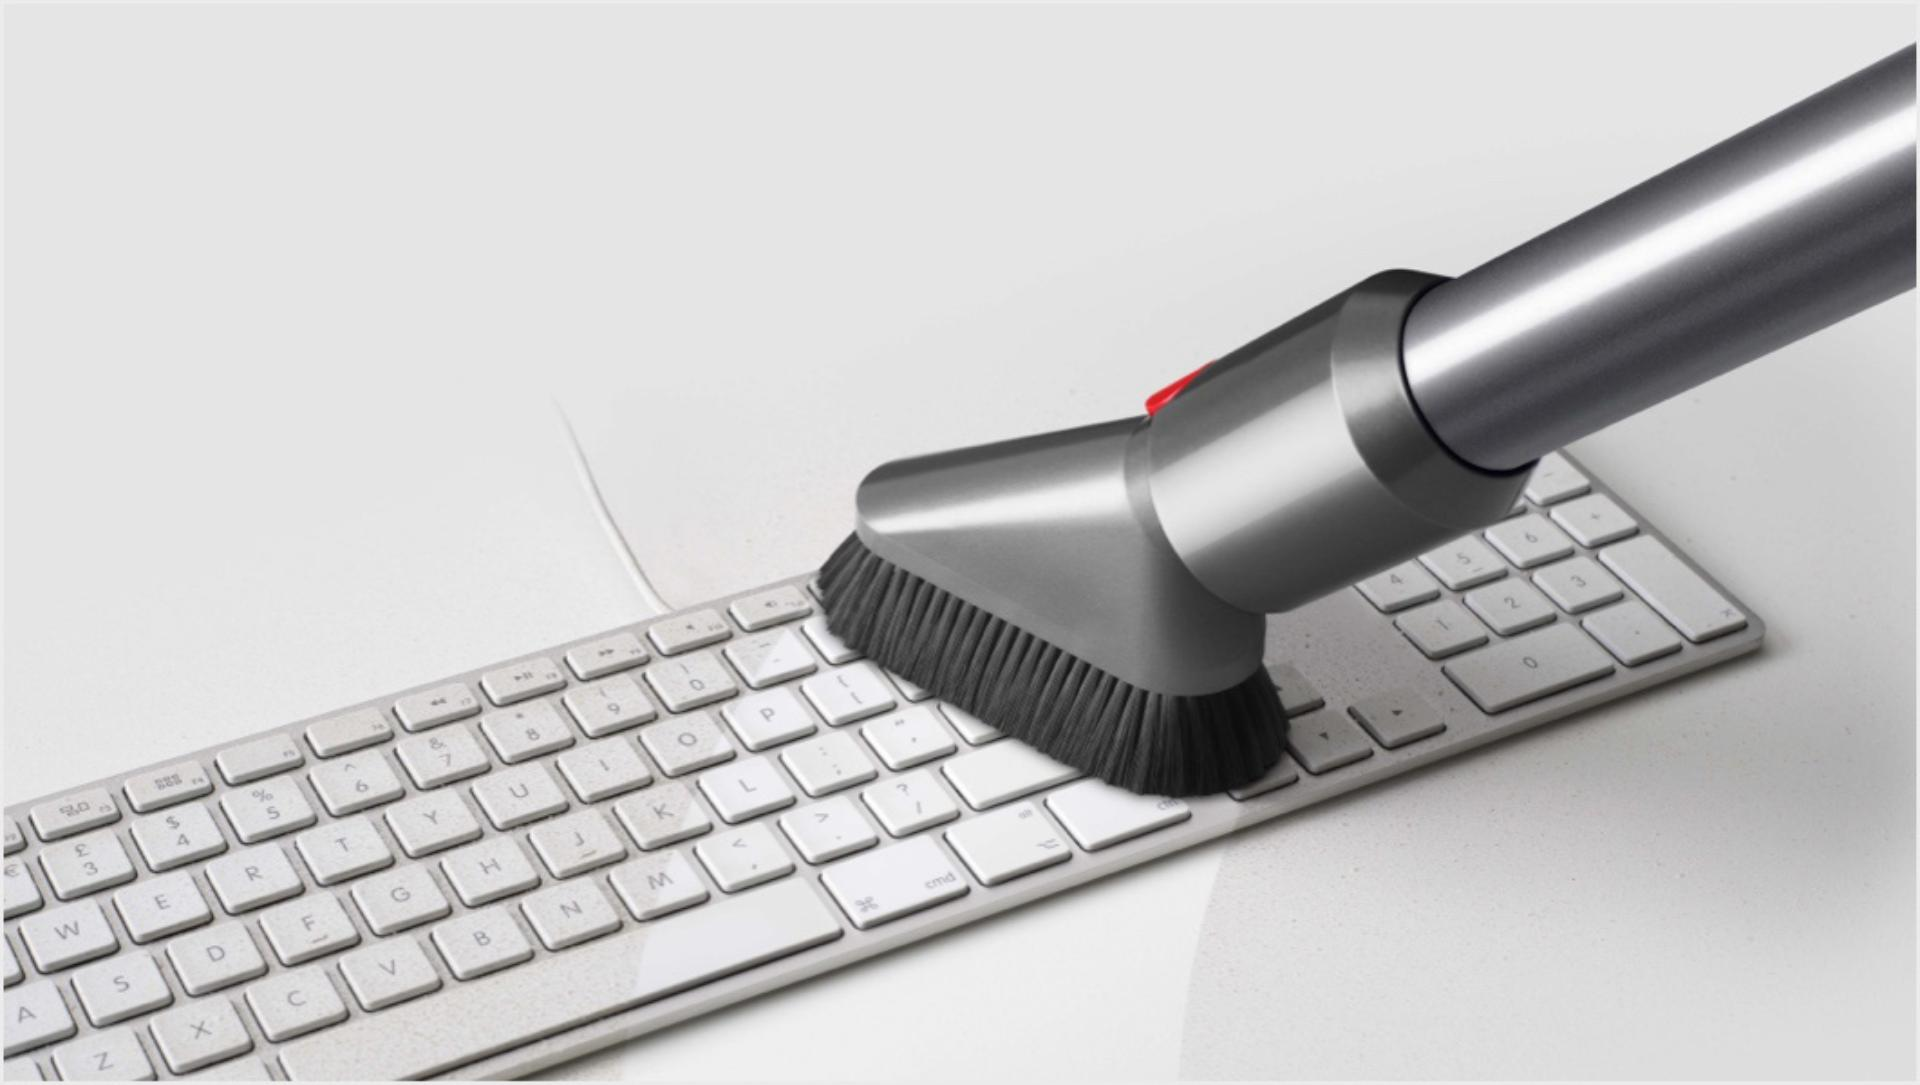 Keep your computer's keyboard clean with a nozzle dust vacuum or vacuum with a brush extension